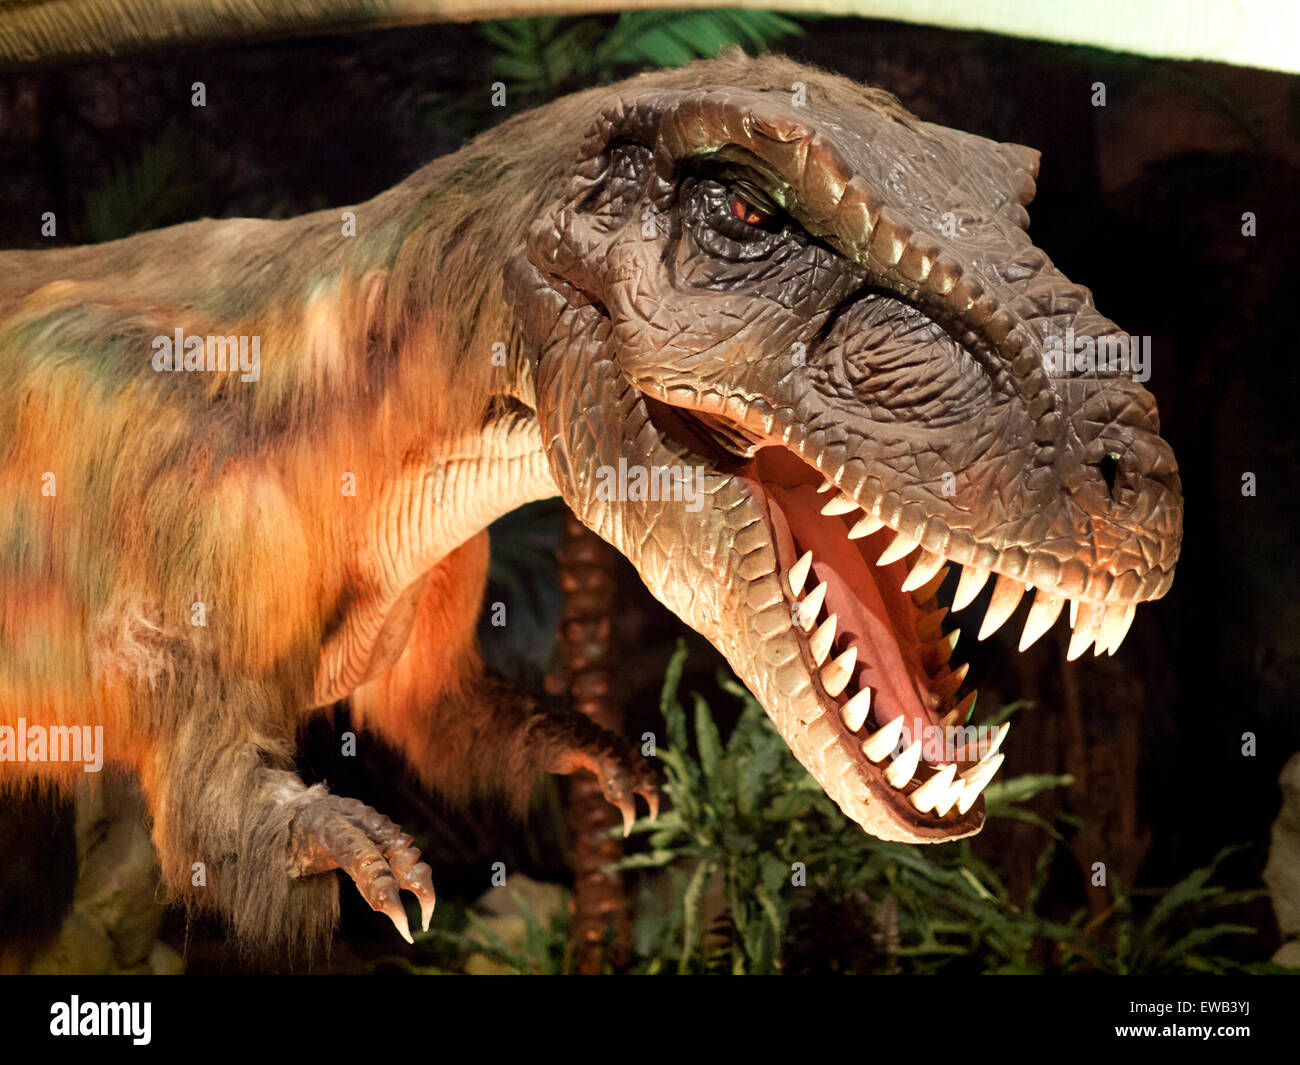 A close-up of a life-sized model of a feathered, juvenile Tyrannosaurus Rex, at the Telus World of Science in Edmonton, Canada. Stock Photo